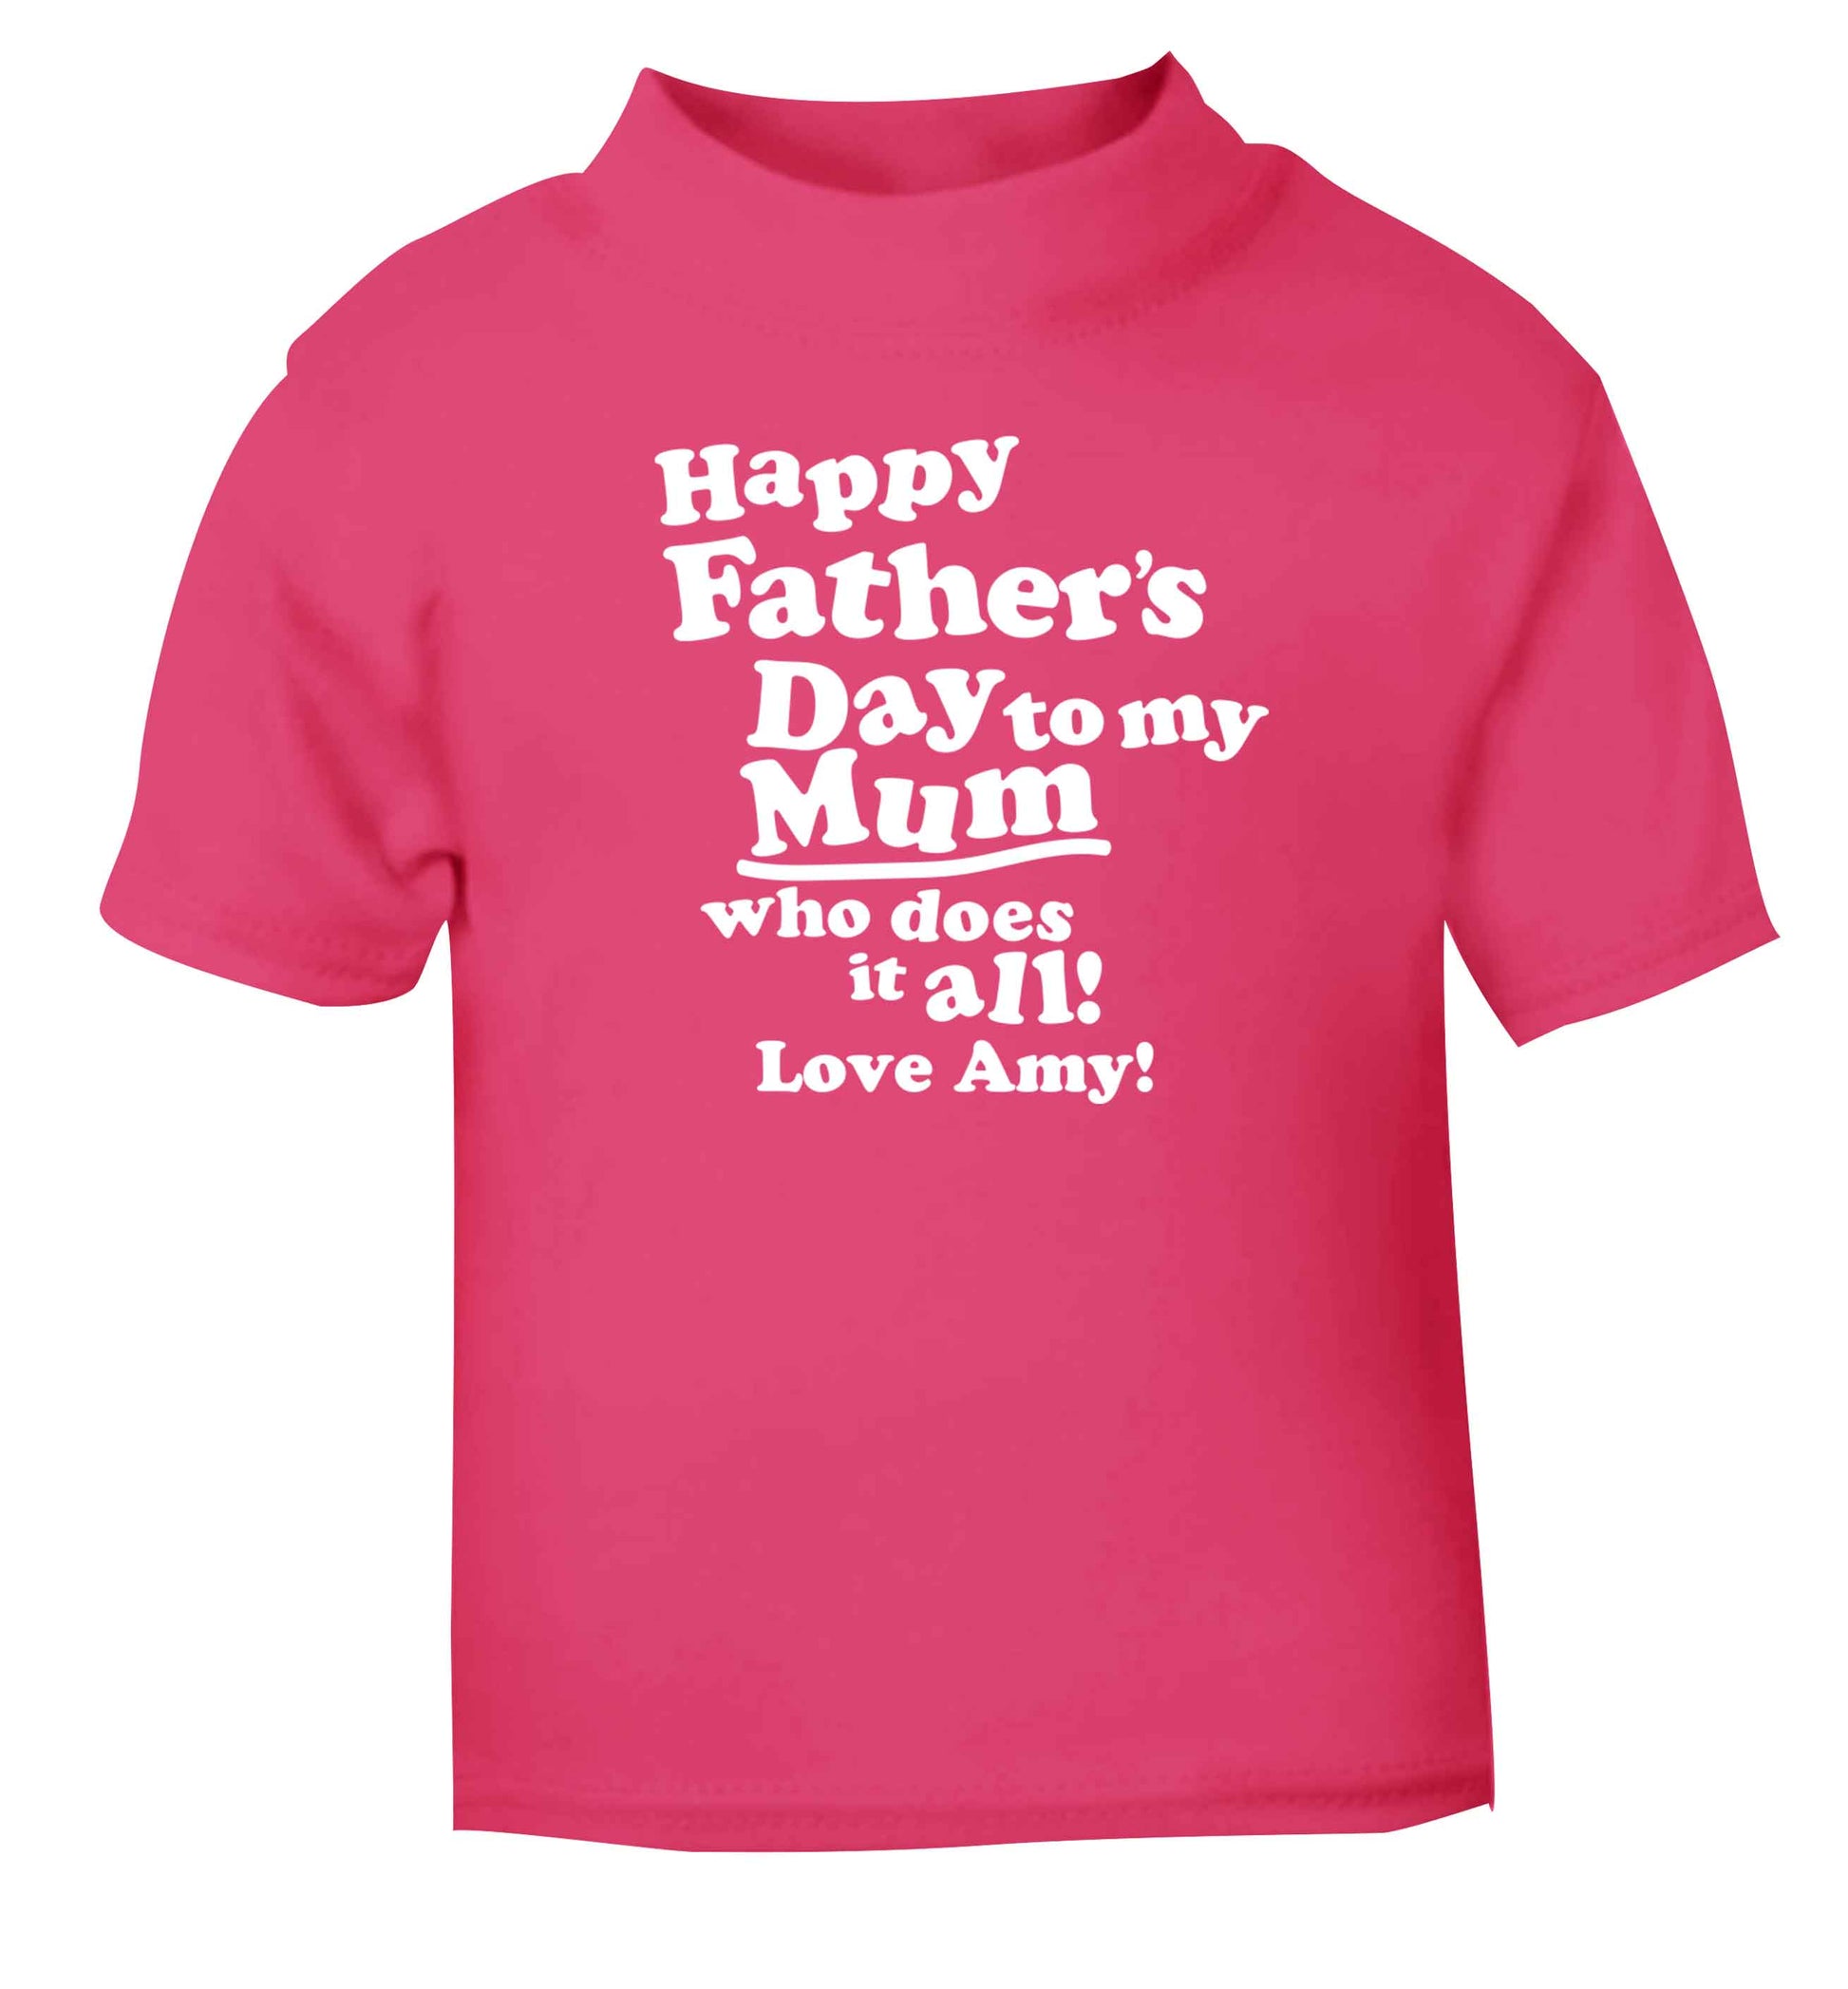 Happy Father's day to my mum who does it all pink baby toddler Tshirt 2 Years